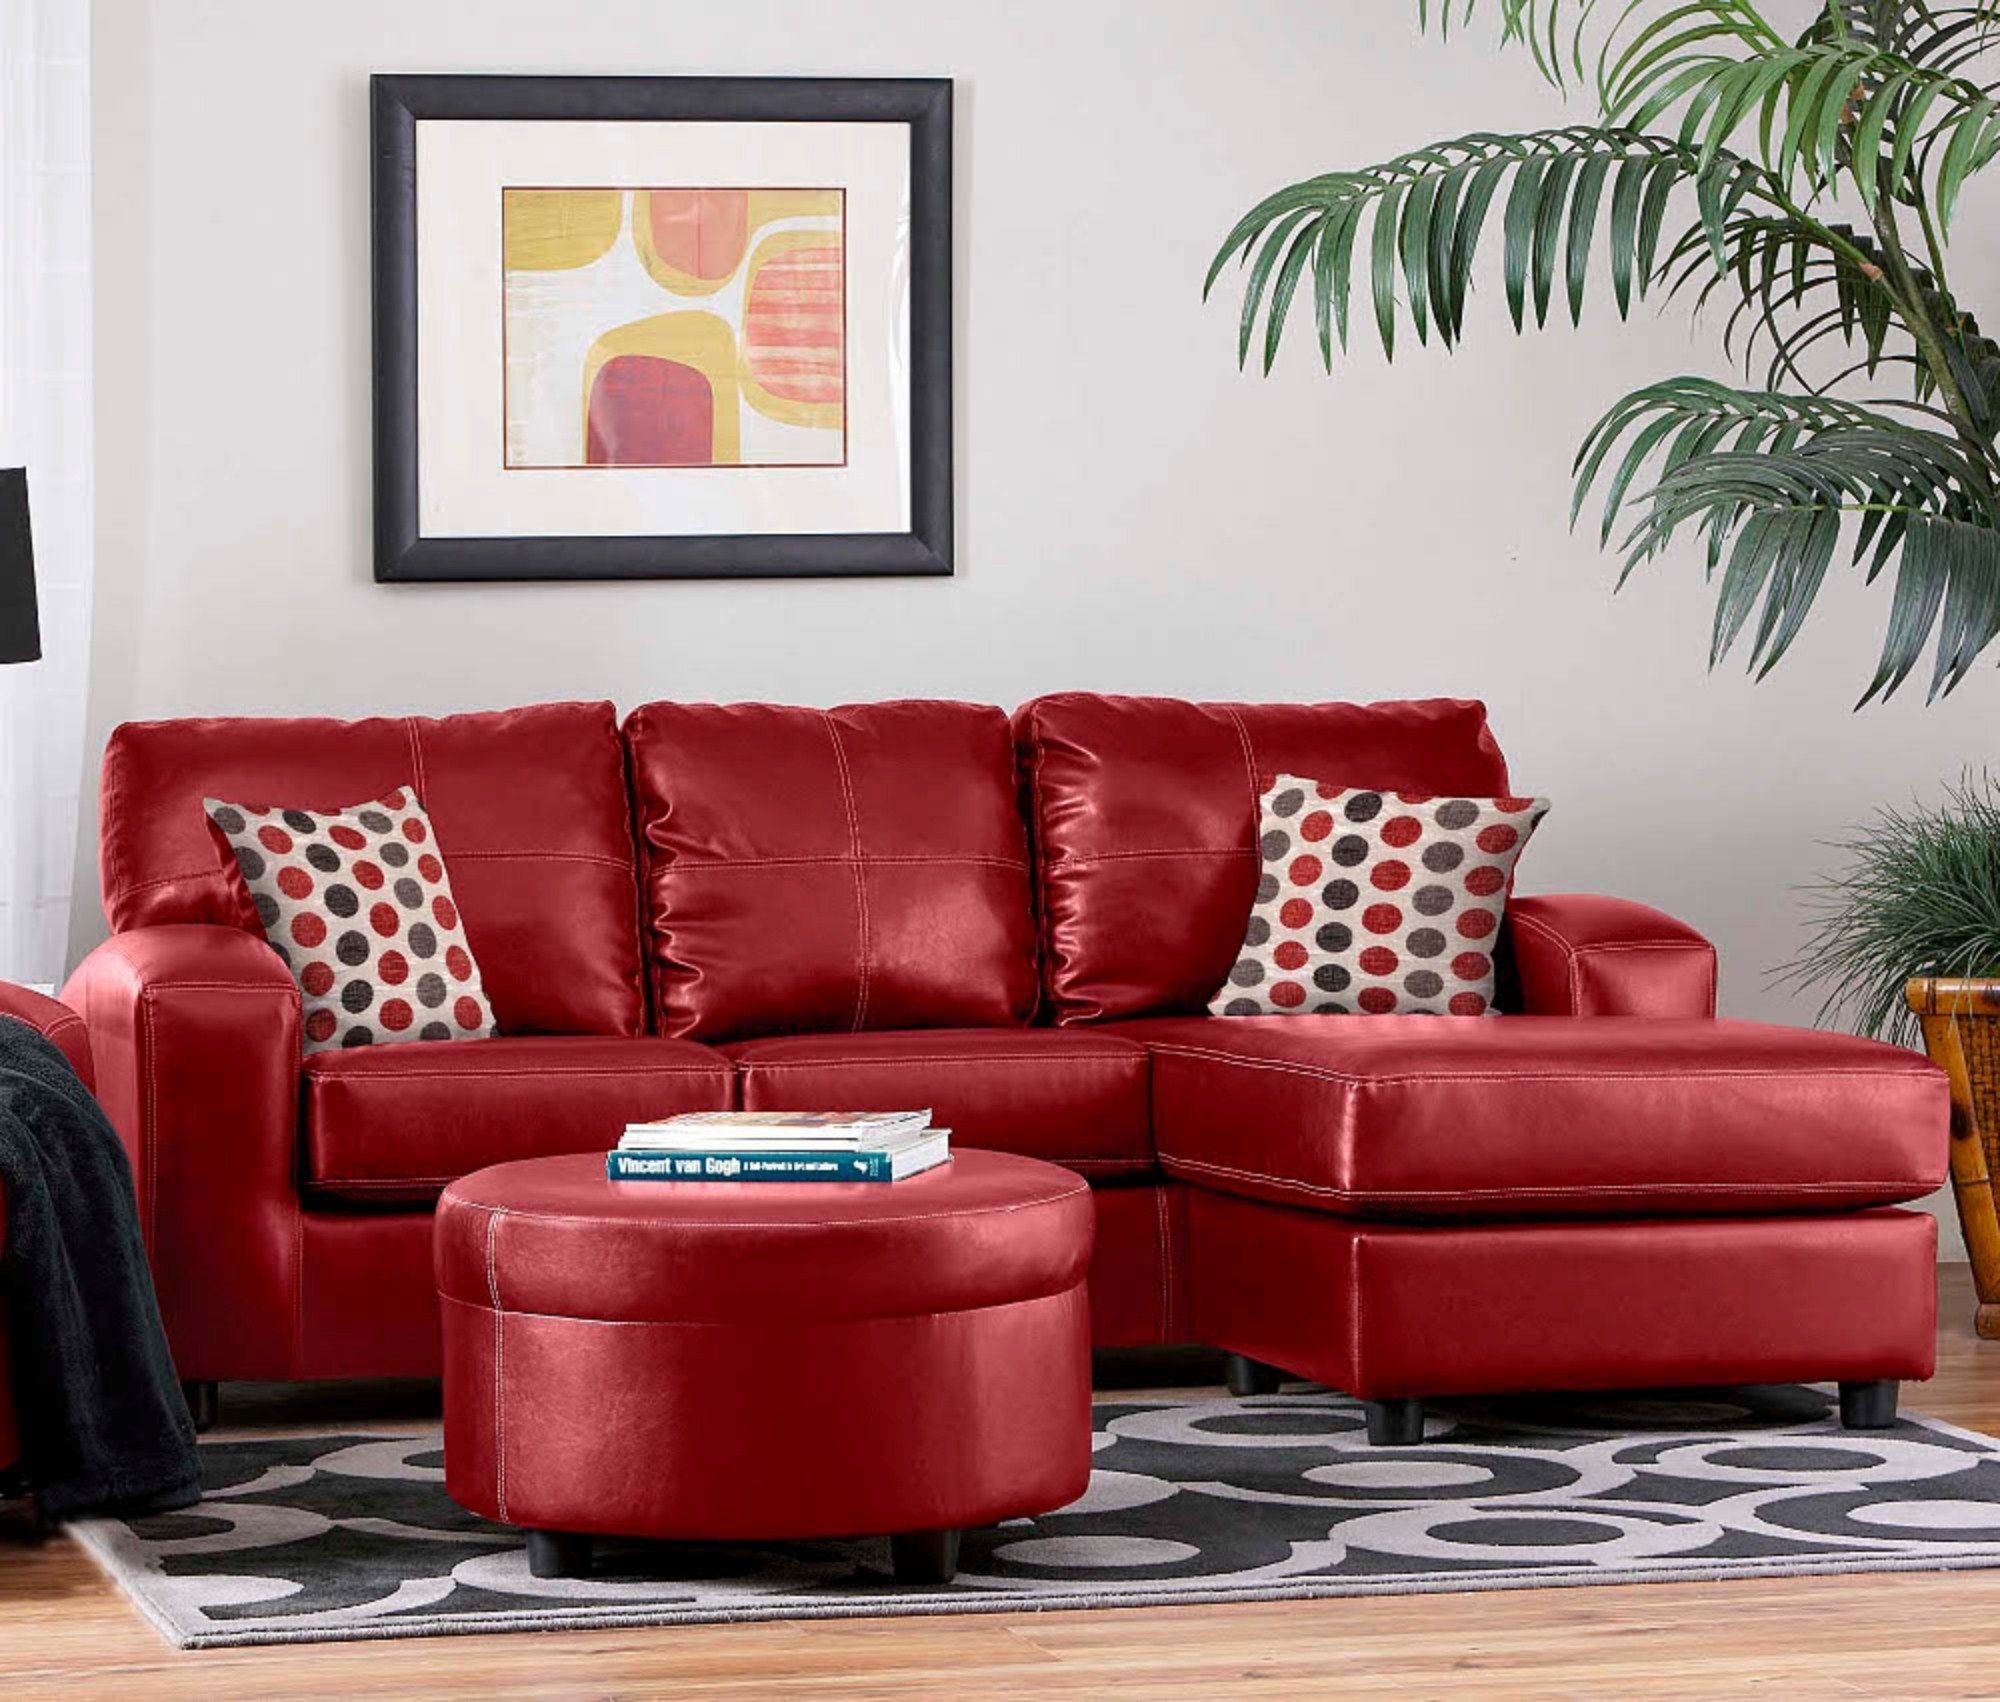 Small Red Leather Sectional Sofa Ezhandui Within Small Red Leather Sectional Sofas 